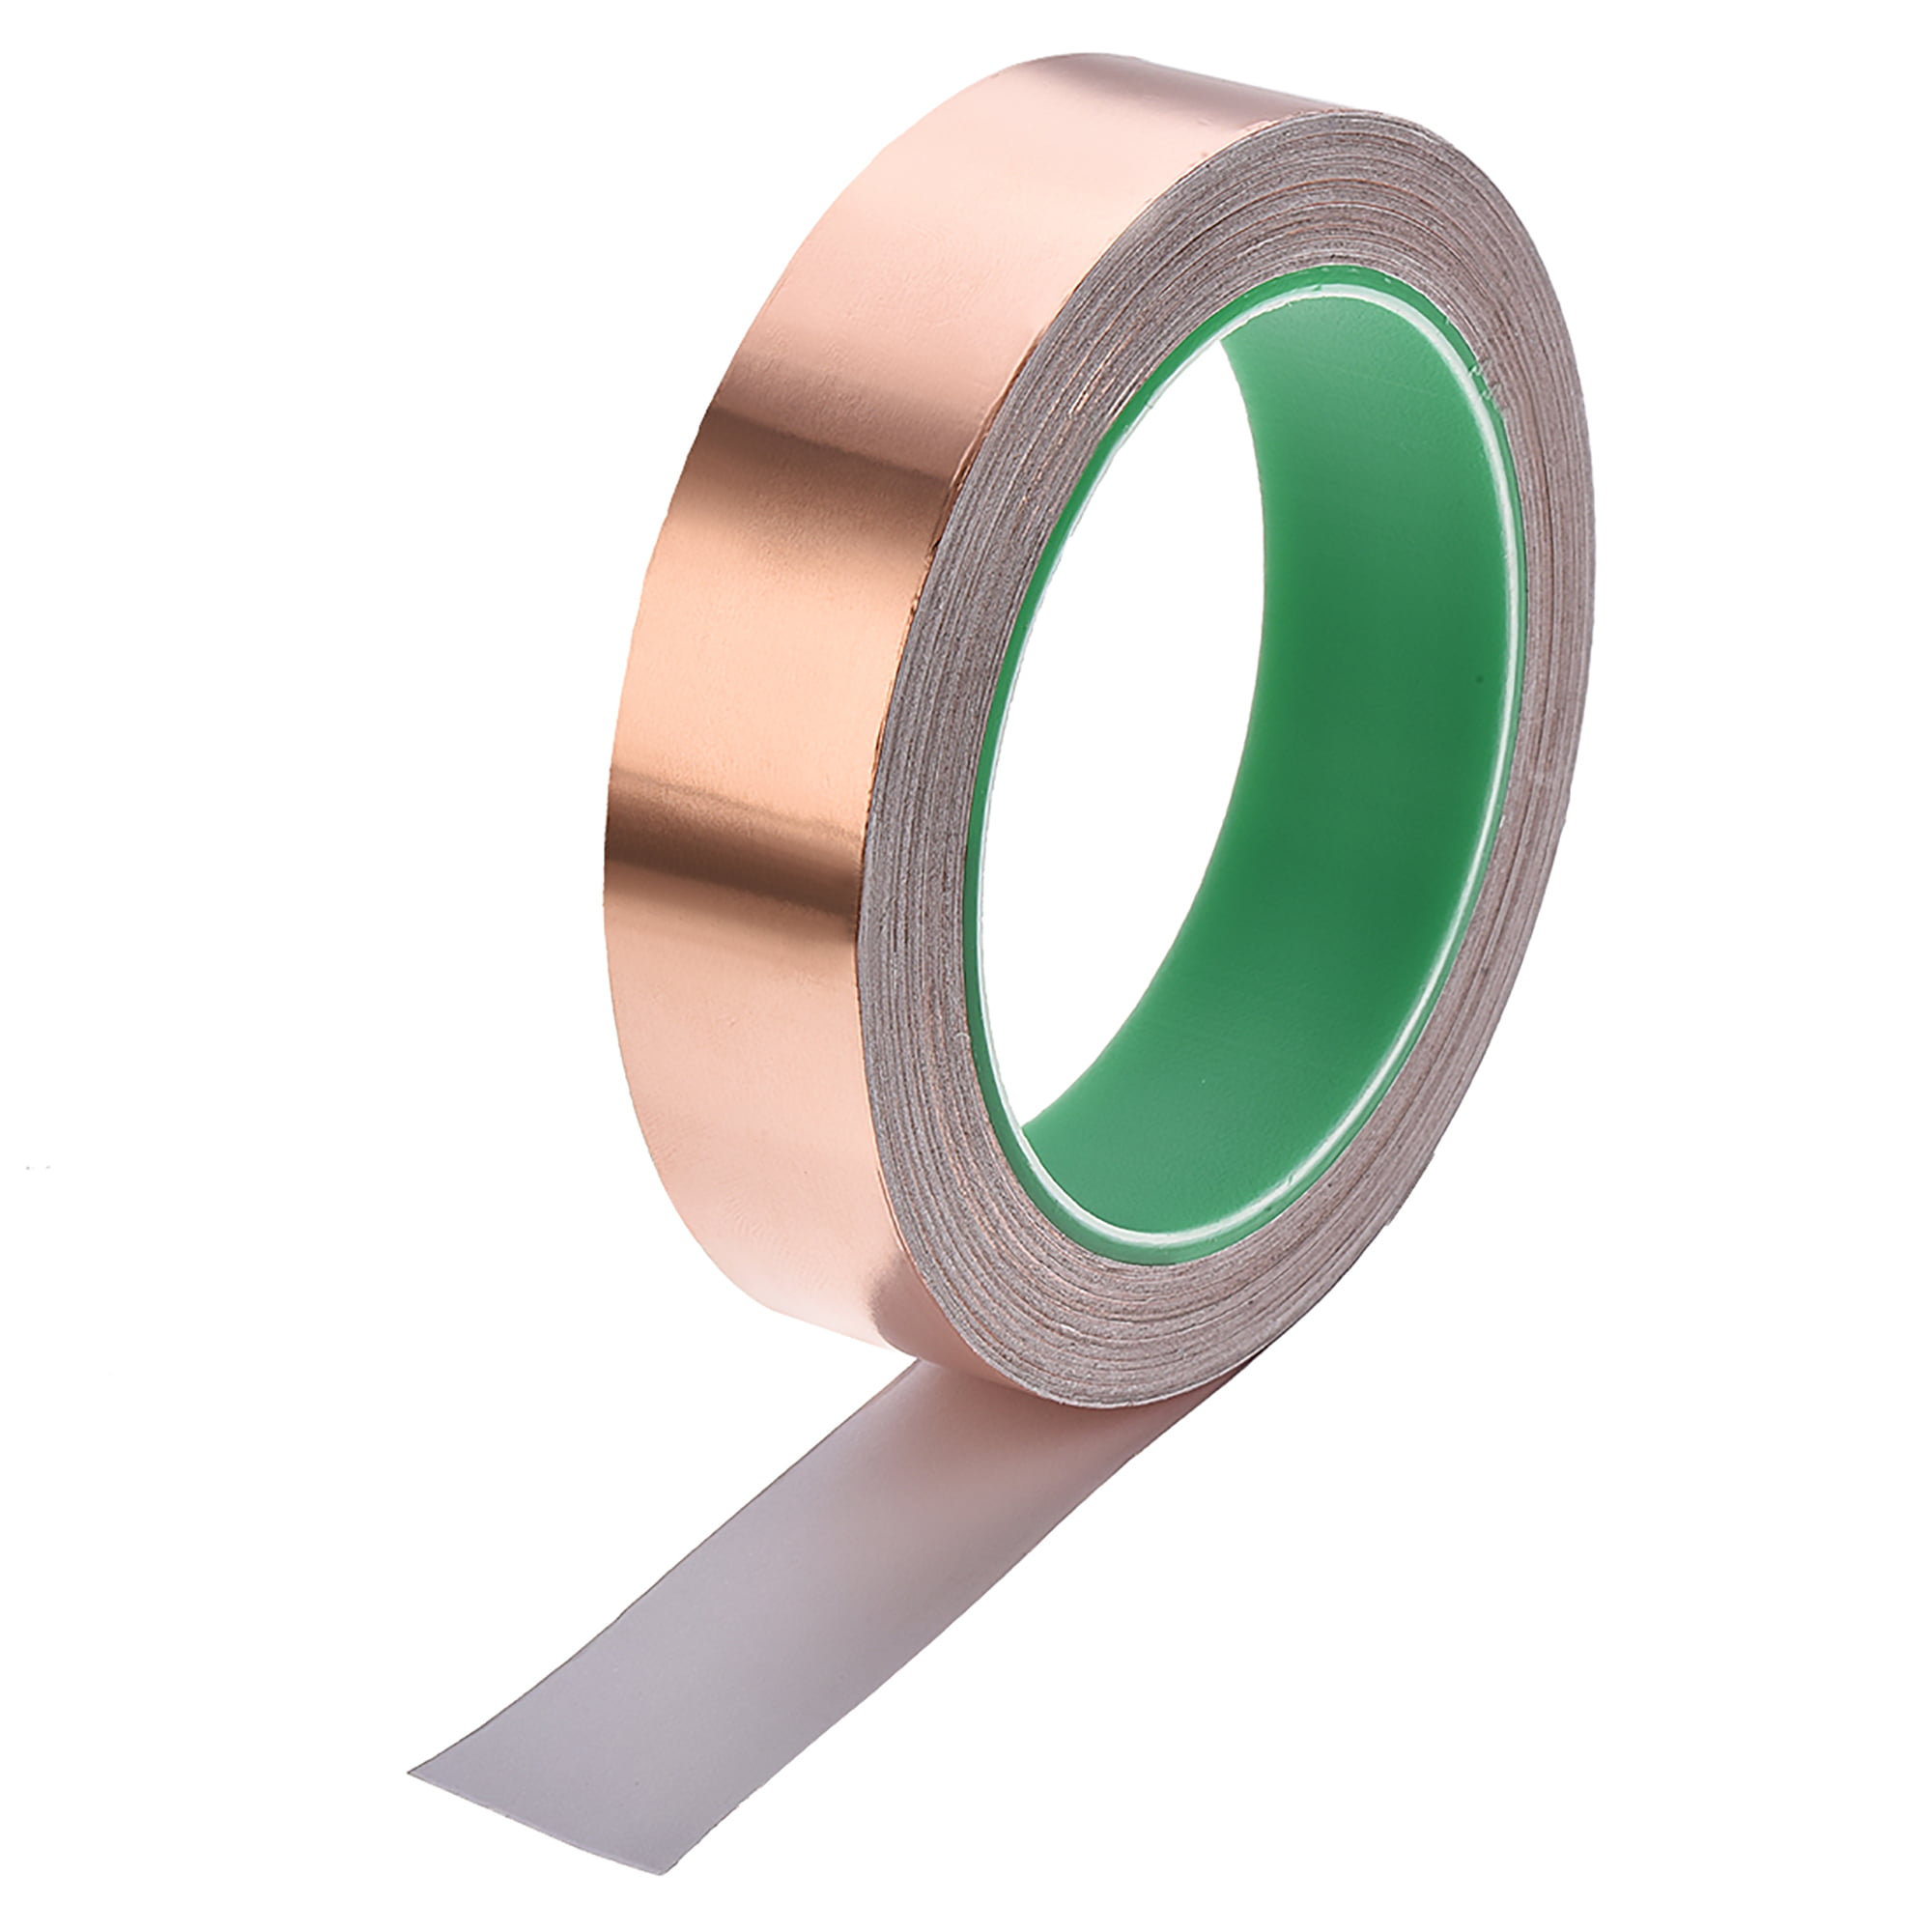 20mm Copper Foil Tape Shielding Tape for EMI EMF and RFI Shielding Conductive Adhesive Tape 20m/65.6ft